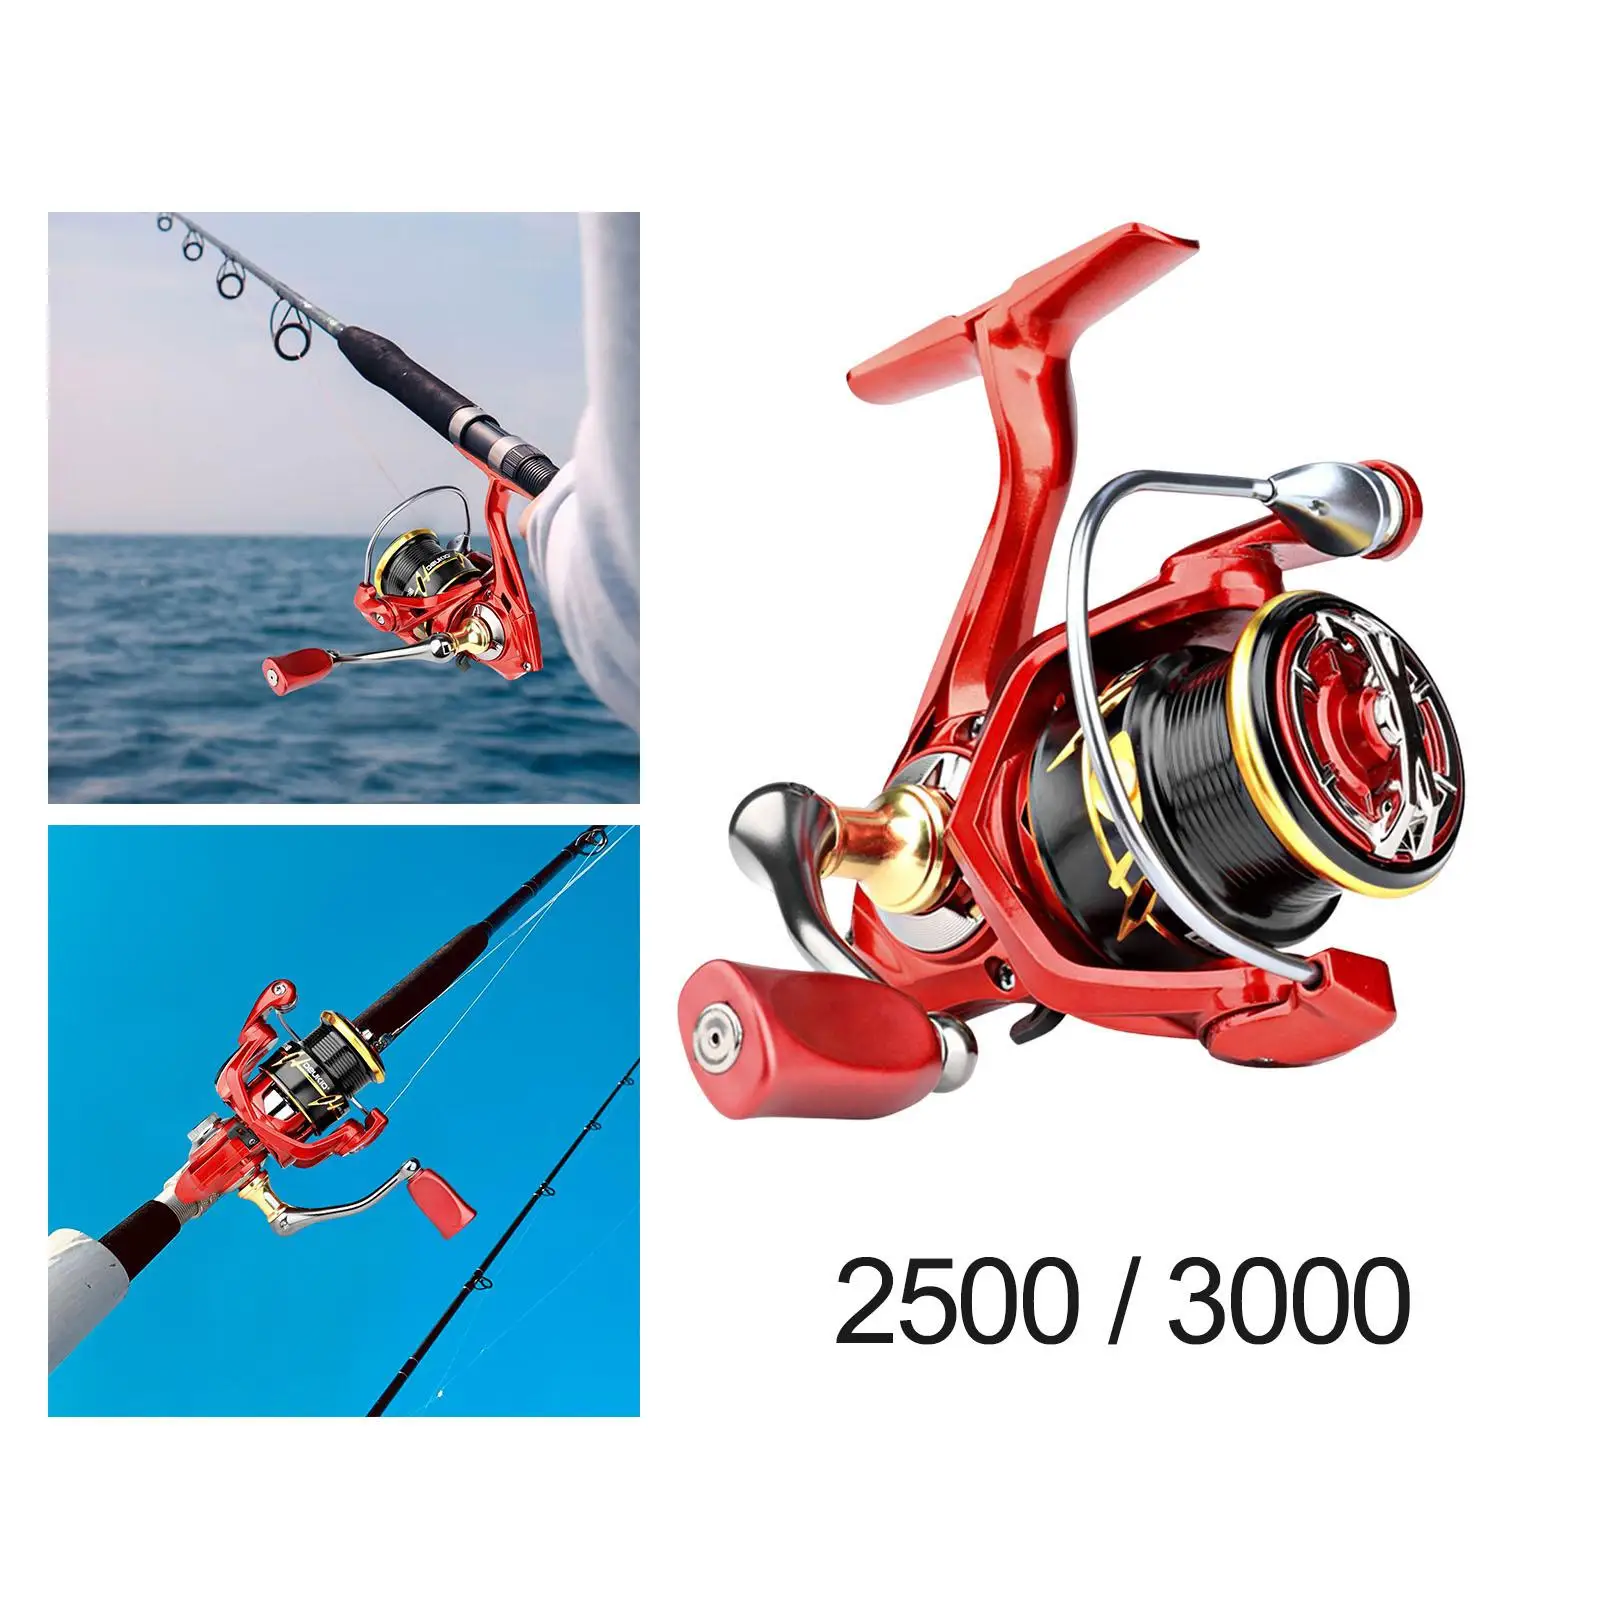 Compact Baitcaster Fishing Reel 6.2:1 Gear Ratio for Saltwater Freshwater